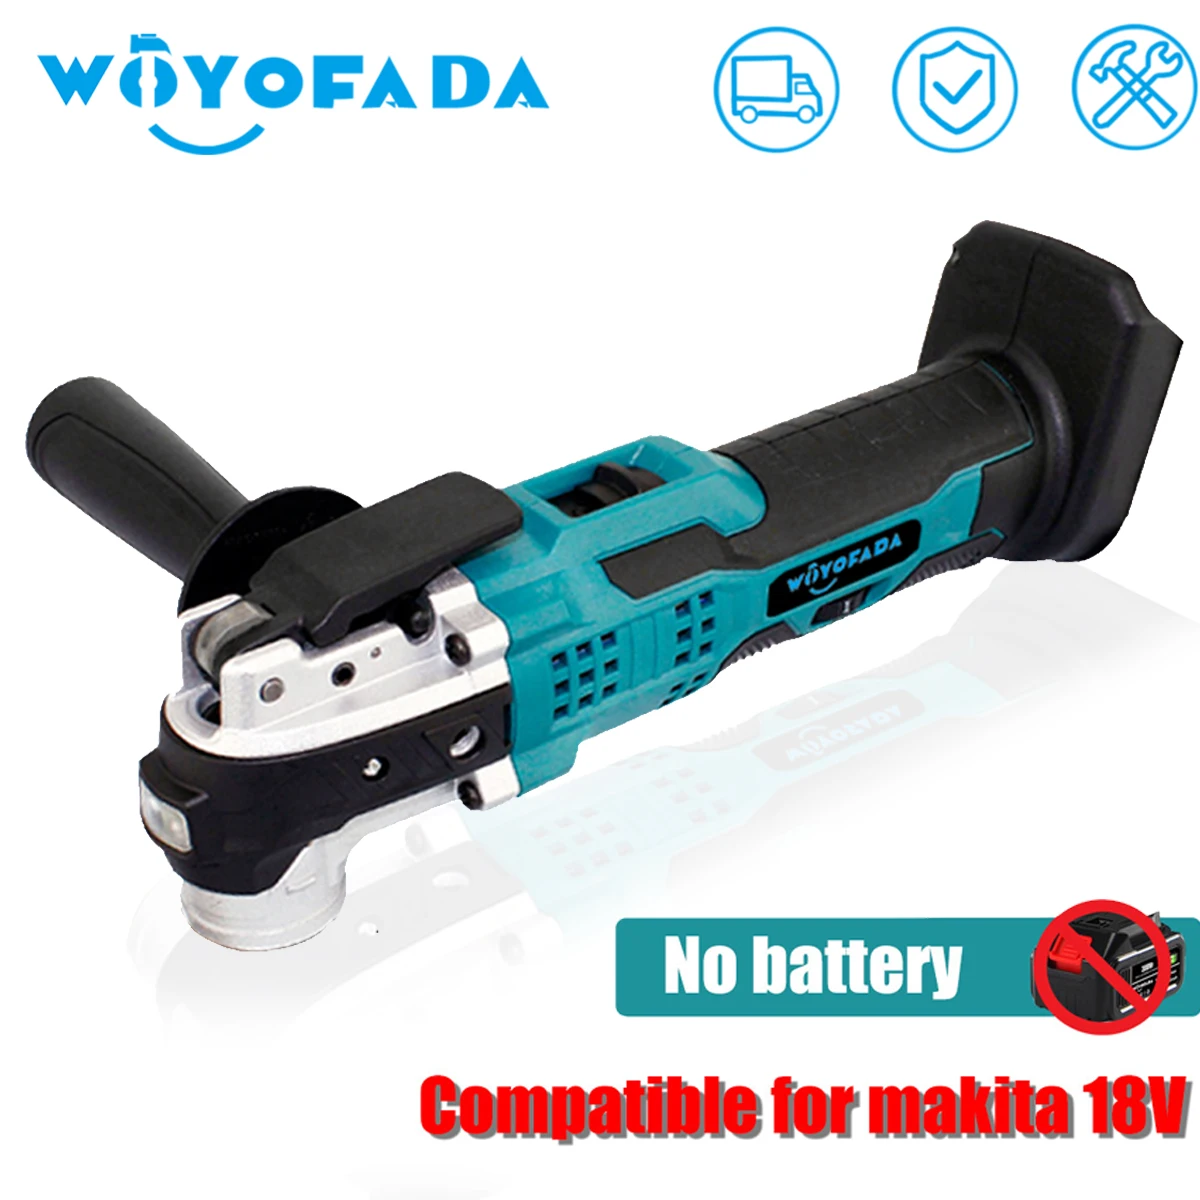 

Oscillating Multi Function Tool for Makita 18V Battery Electric Saw Trimmer Shovel Polisher Woodworking Tool（No battery）